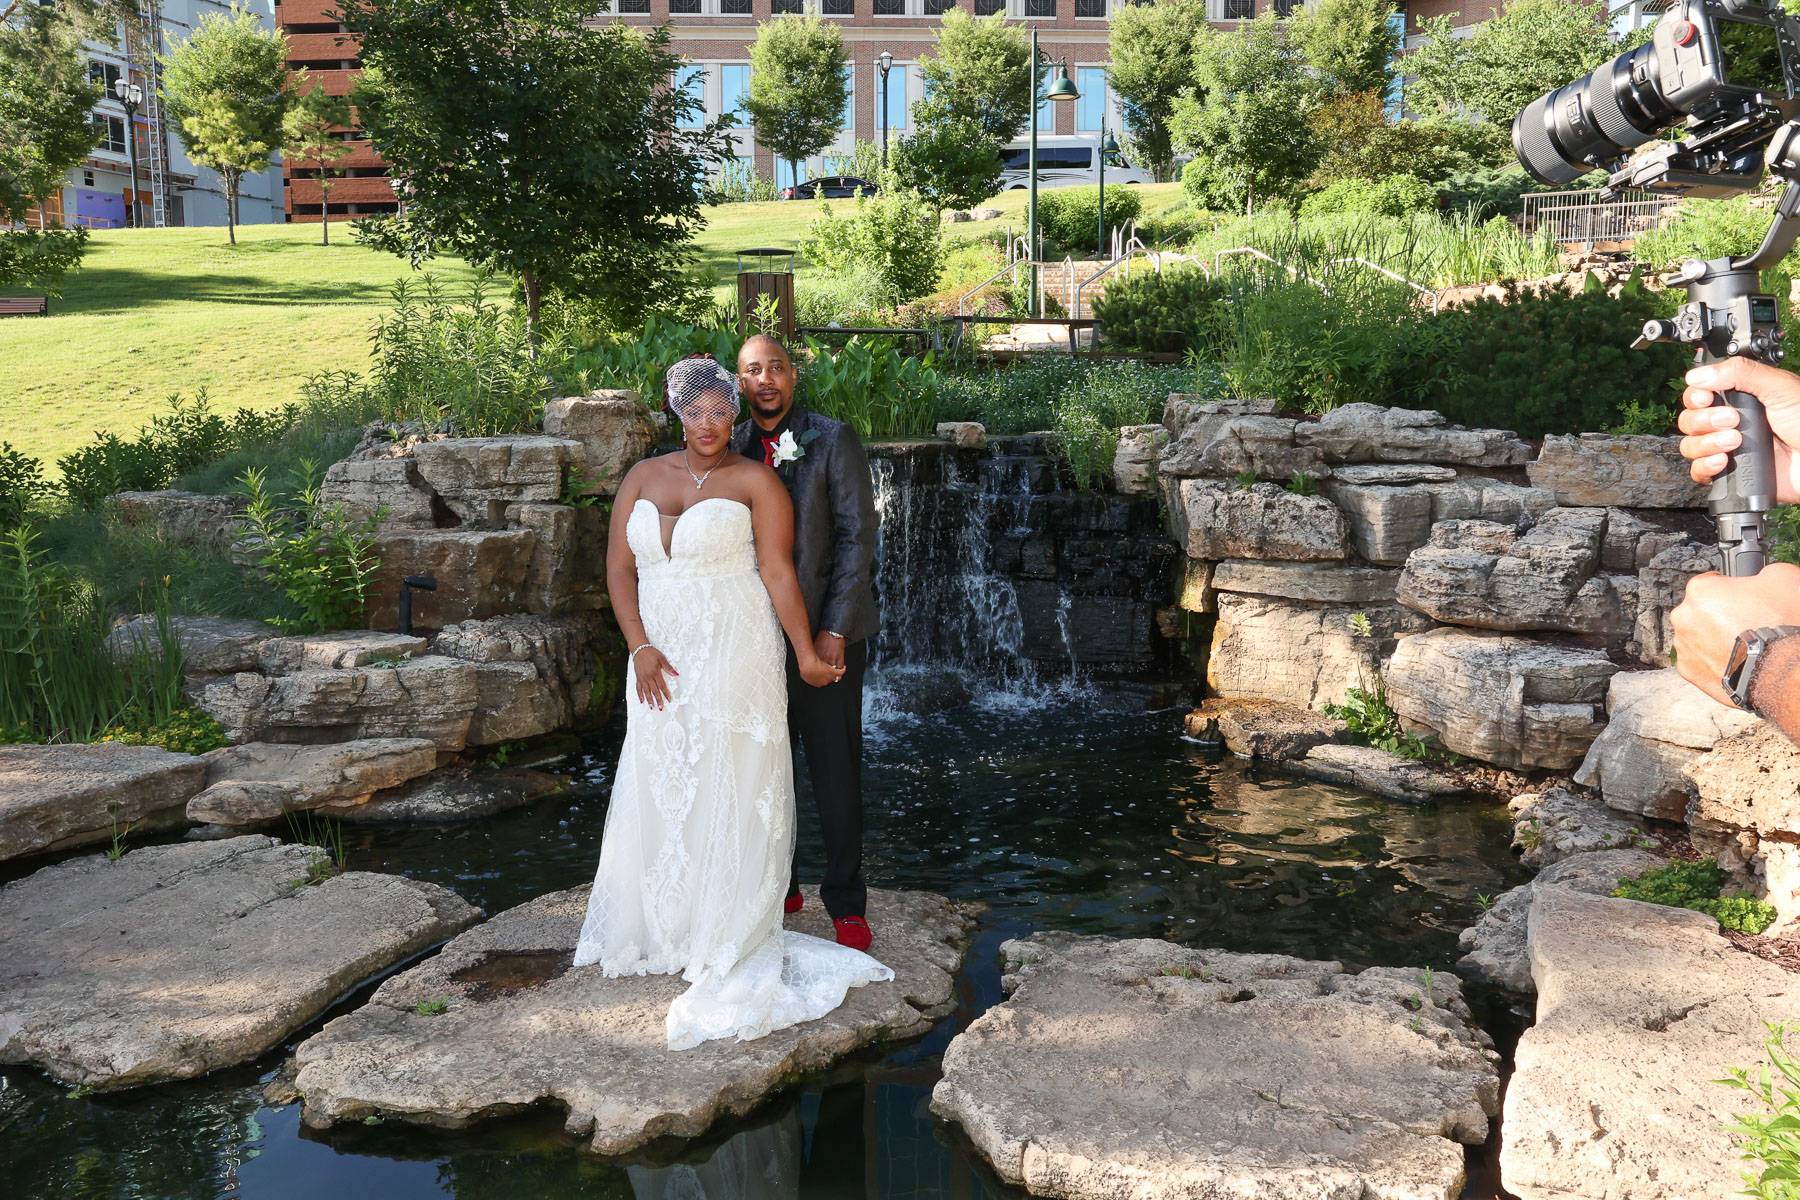 The newlyweds standing by a pond